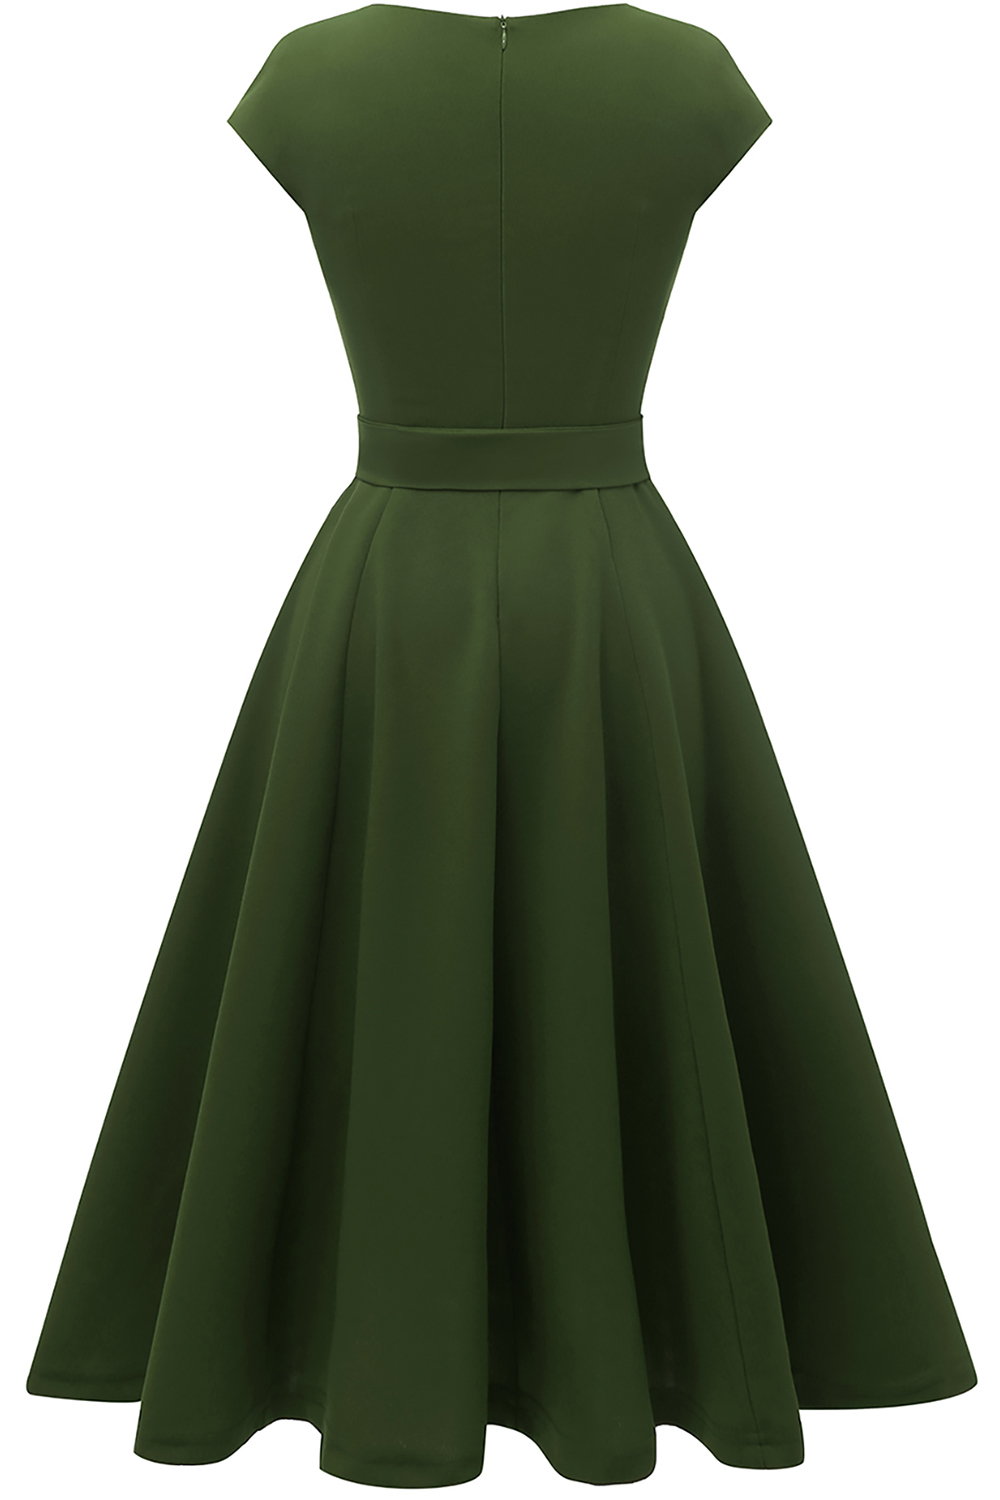 A-Line Knee-Length Armygreen Cocktail Dress with Cap Sleeves, Vintage Style, Unique and Elegant